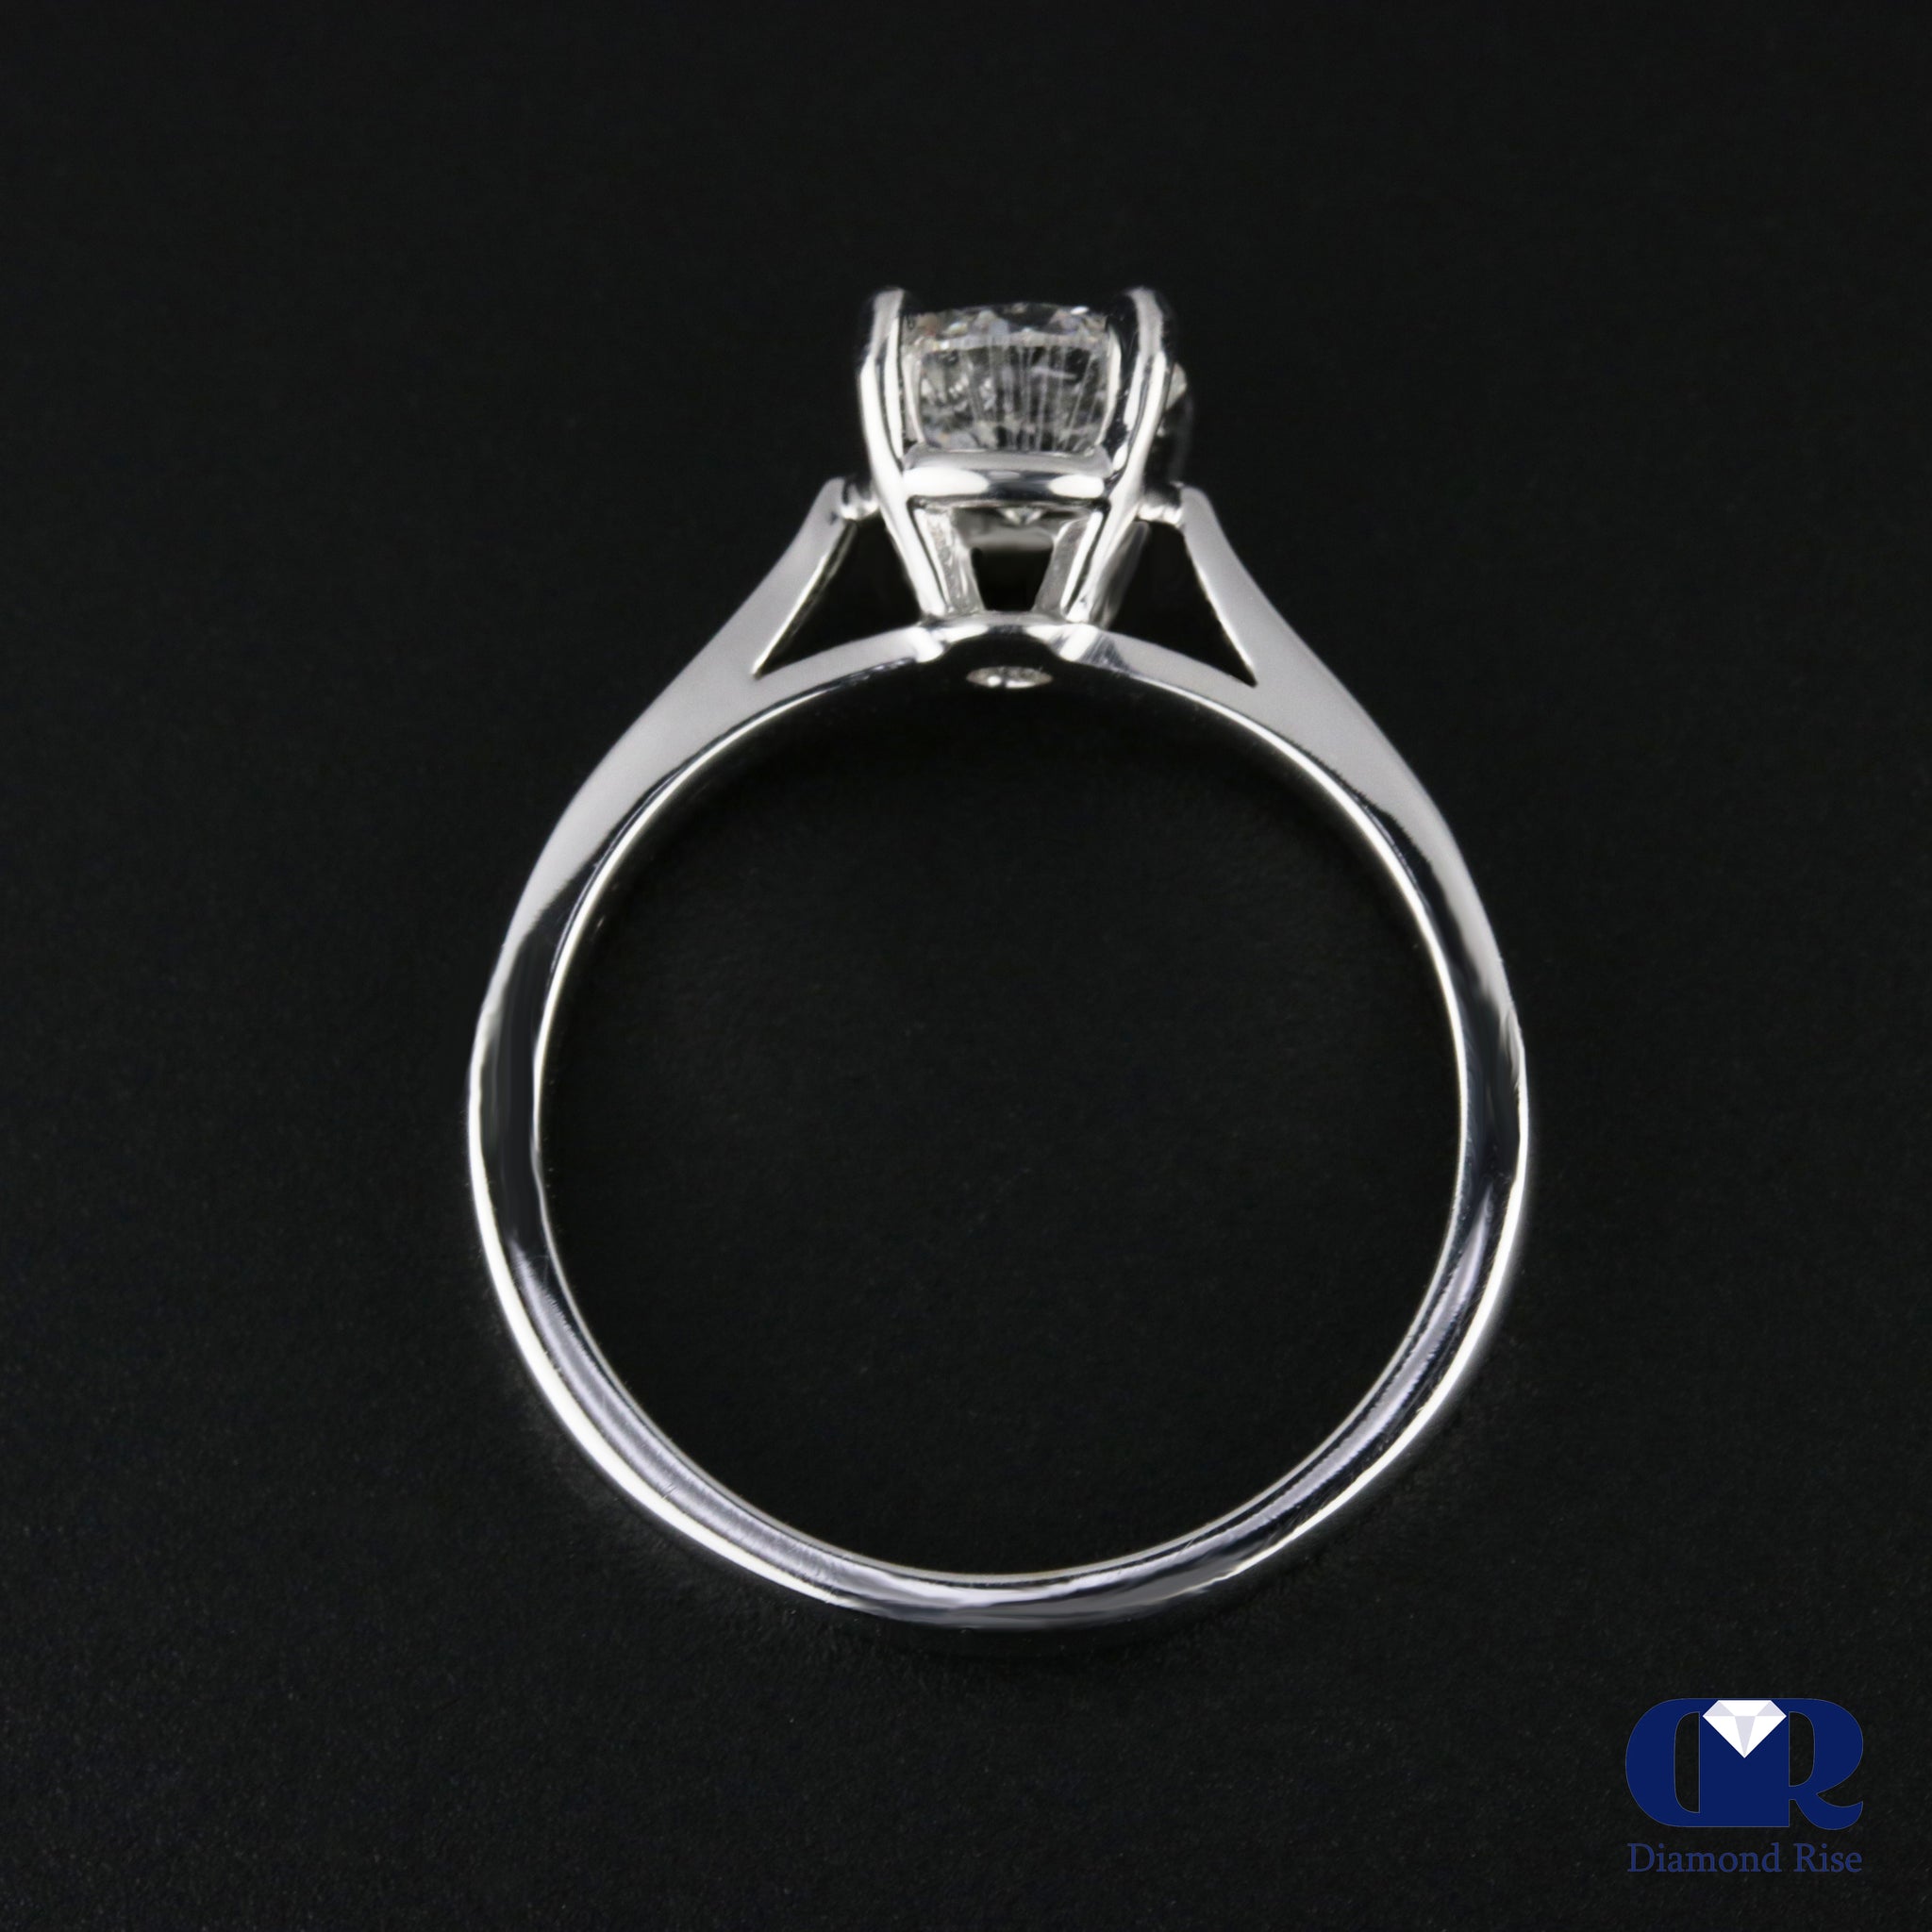 1.00 Carat Round Cut Diamond 4 Prong Solitaire Engagement Ring In 14K ...